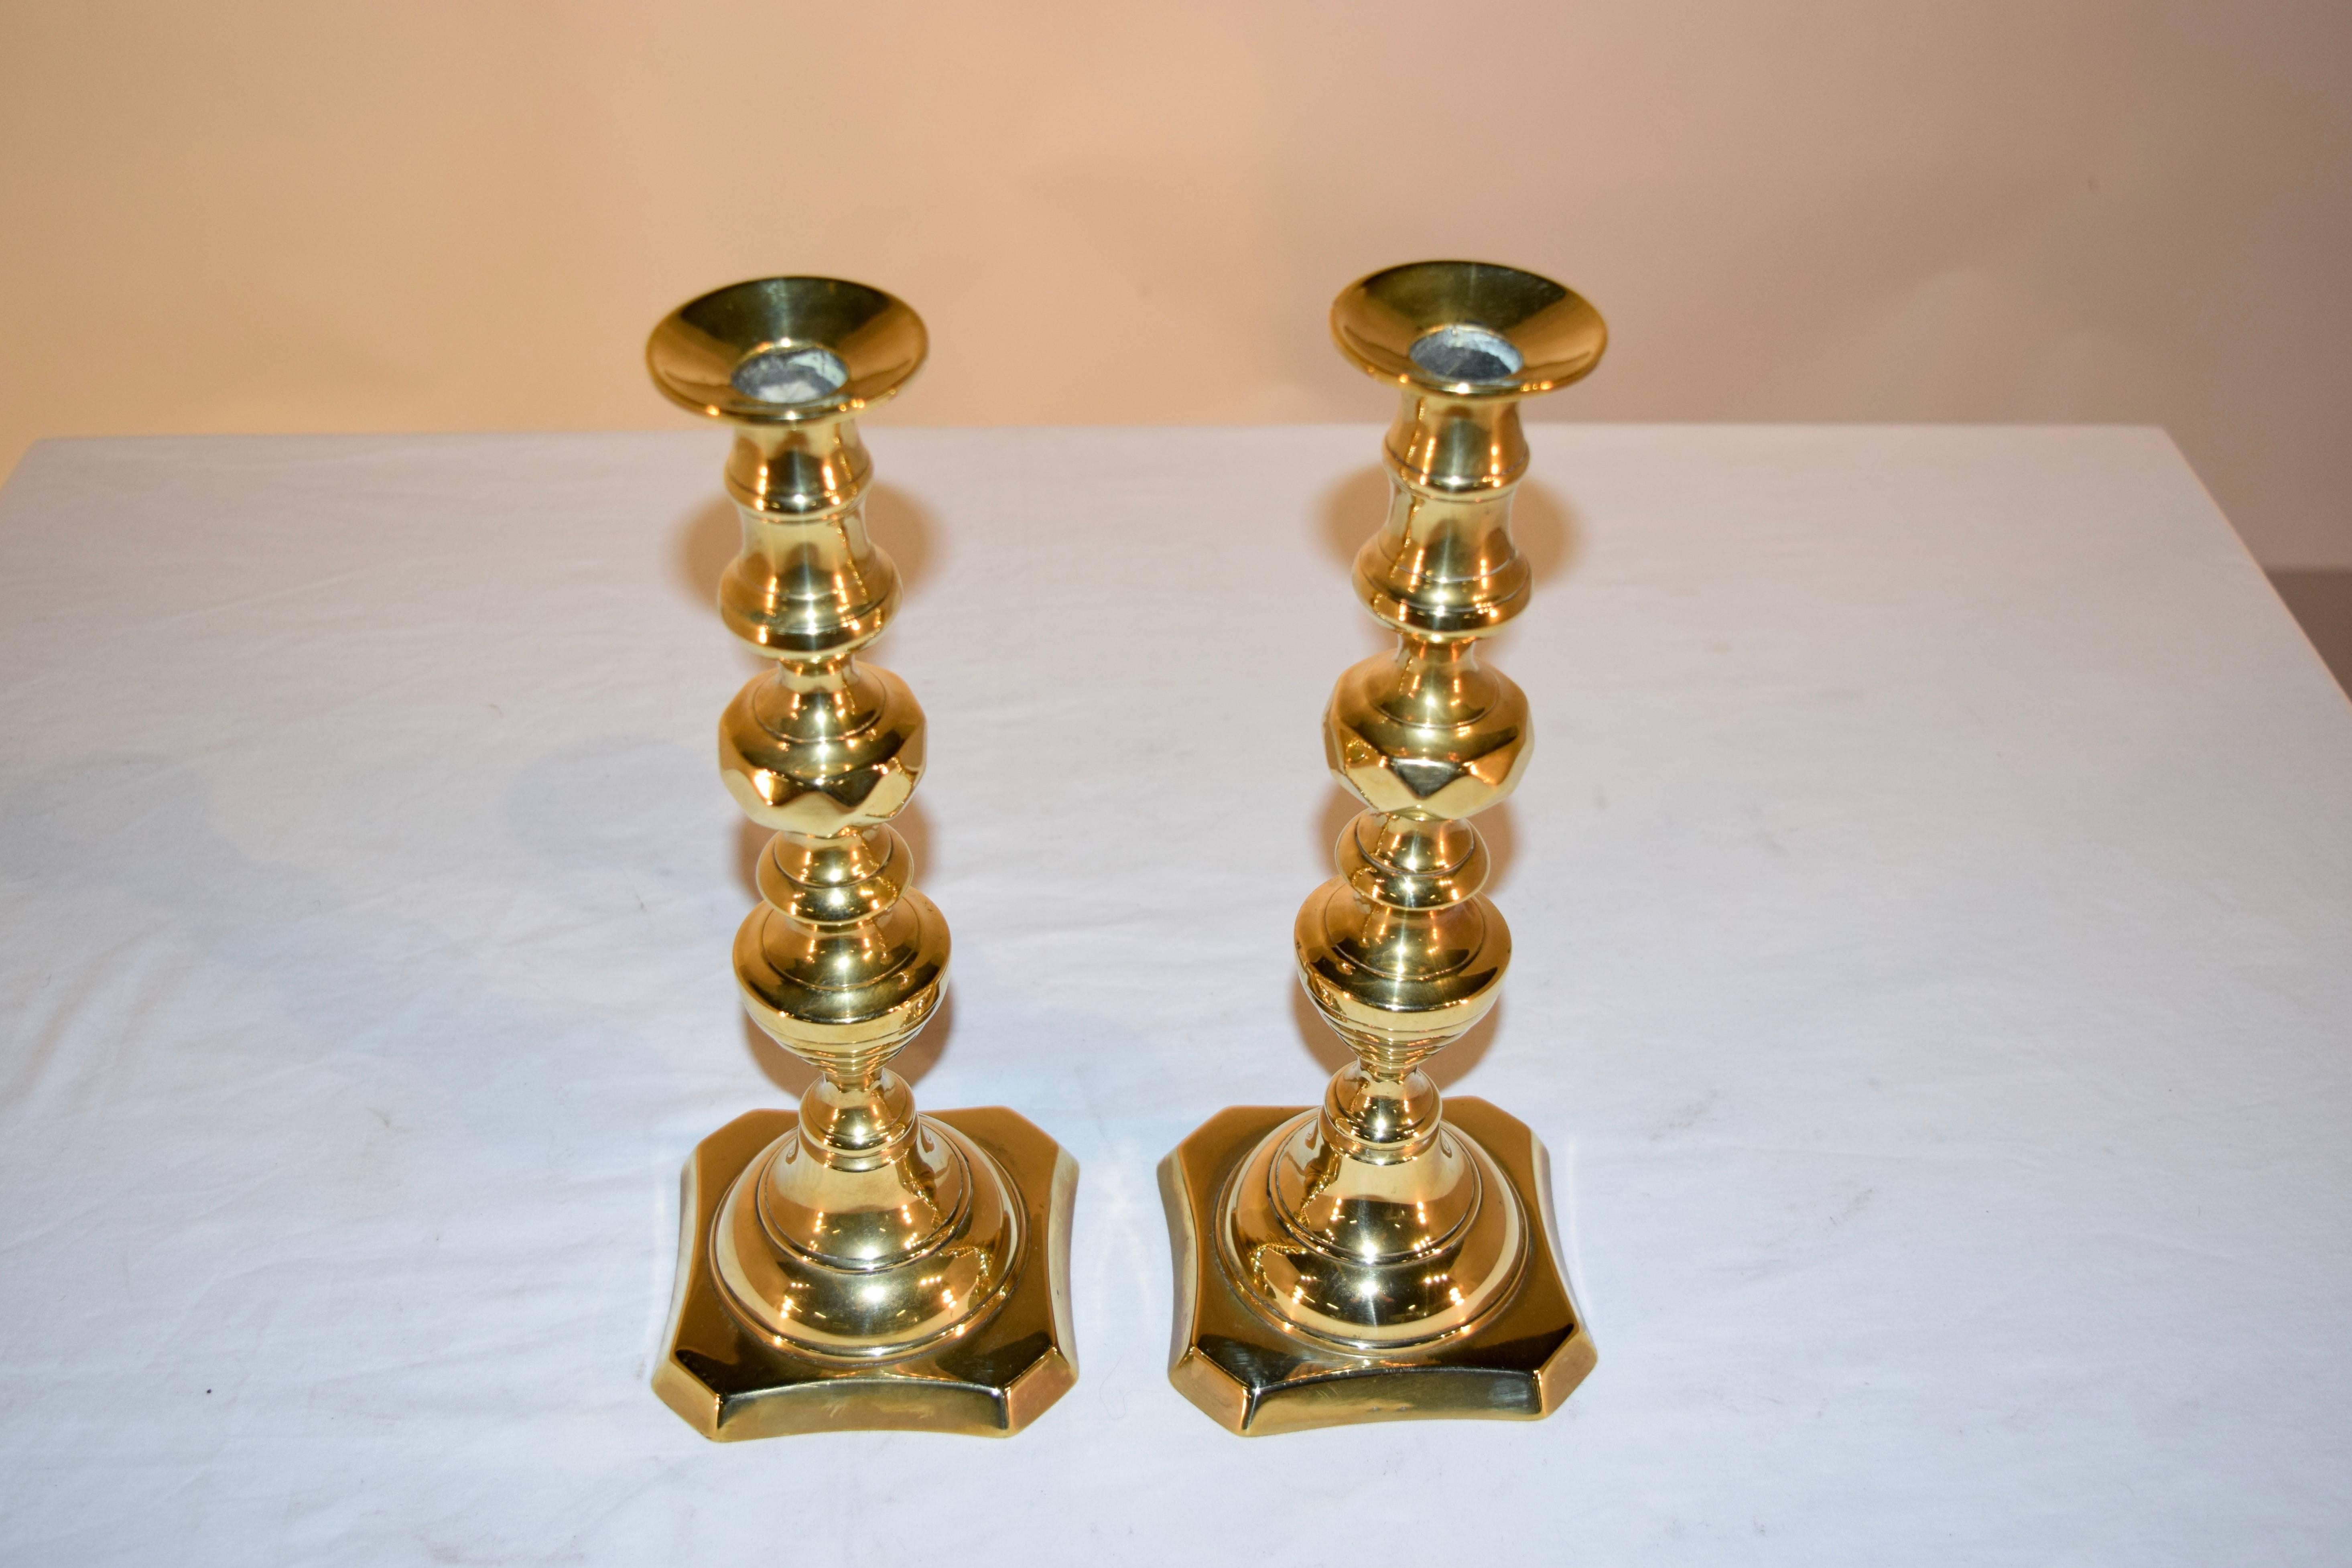 Pair of 19th century English brass candlesticks in a beehive and diamond pattern.